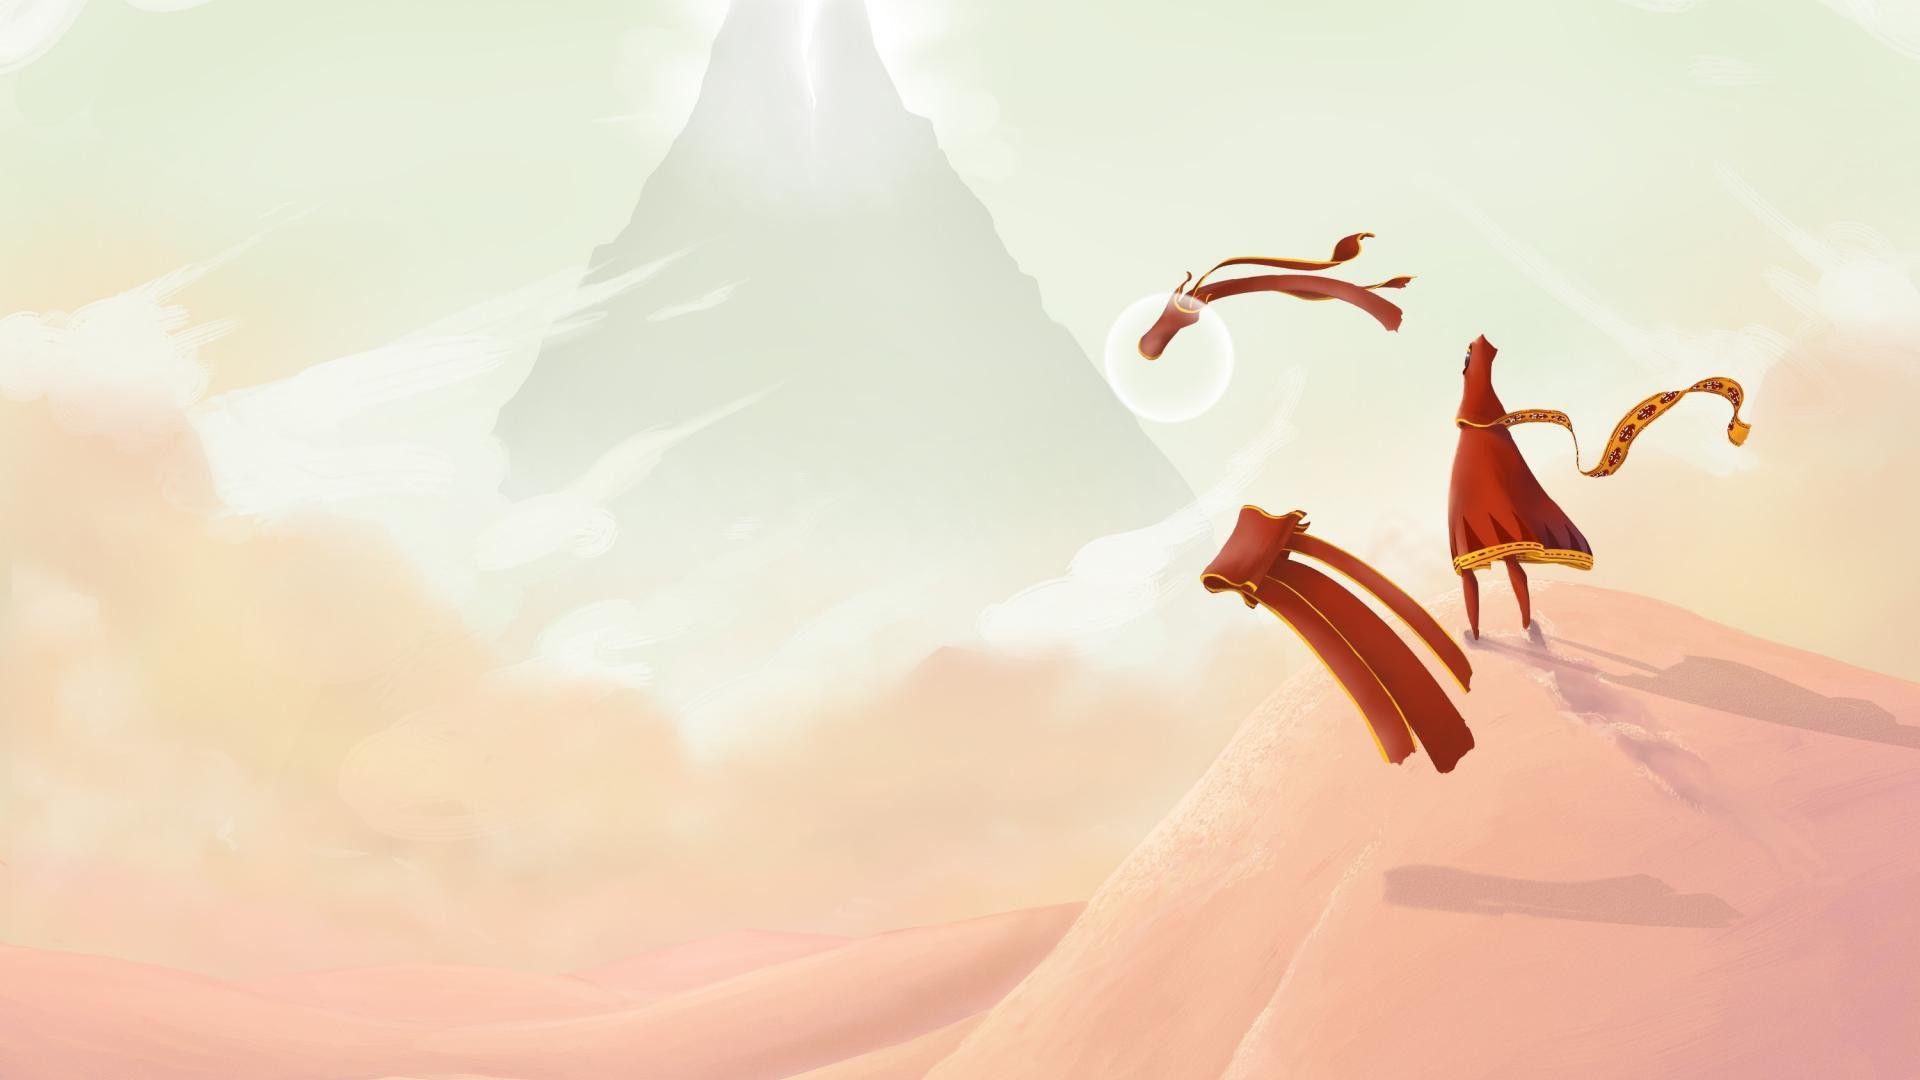 4541209 Journey (game) - Rare Gallery HD Wallpapers